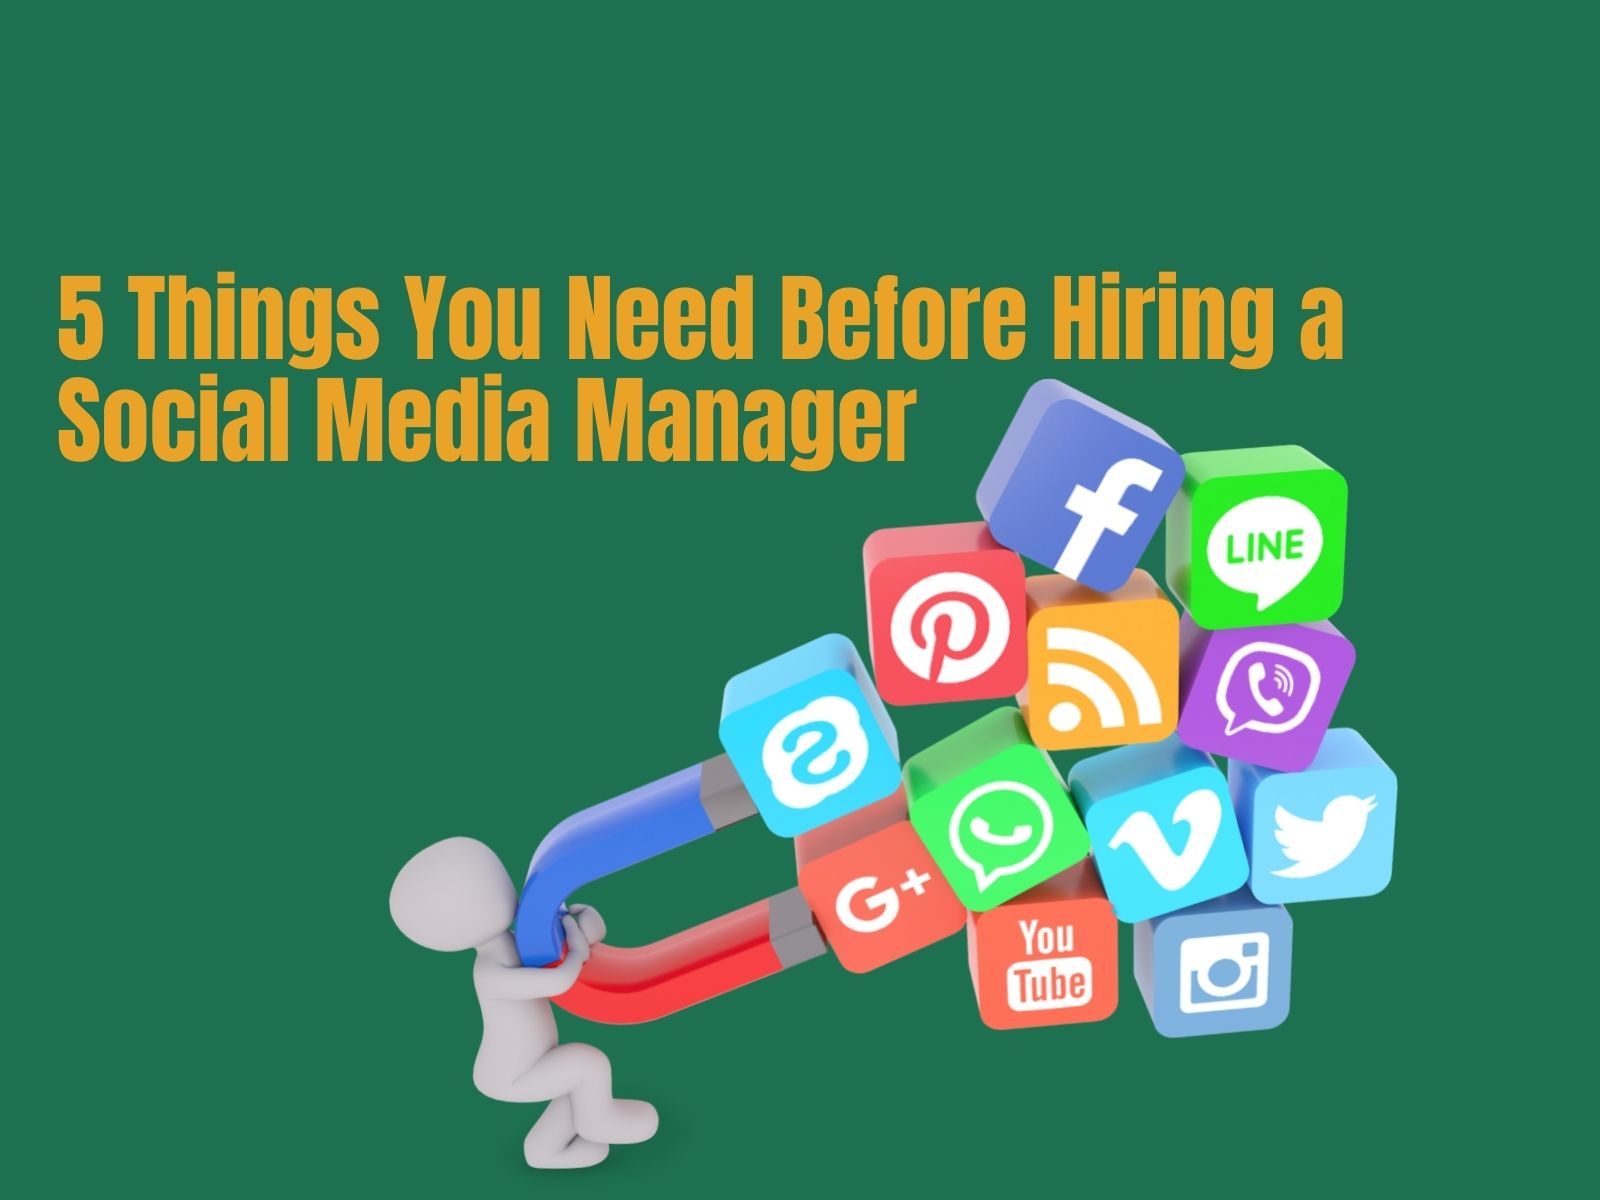 5 Things You Need Before Hiring a Social Media Manager